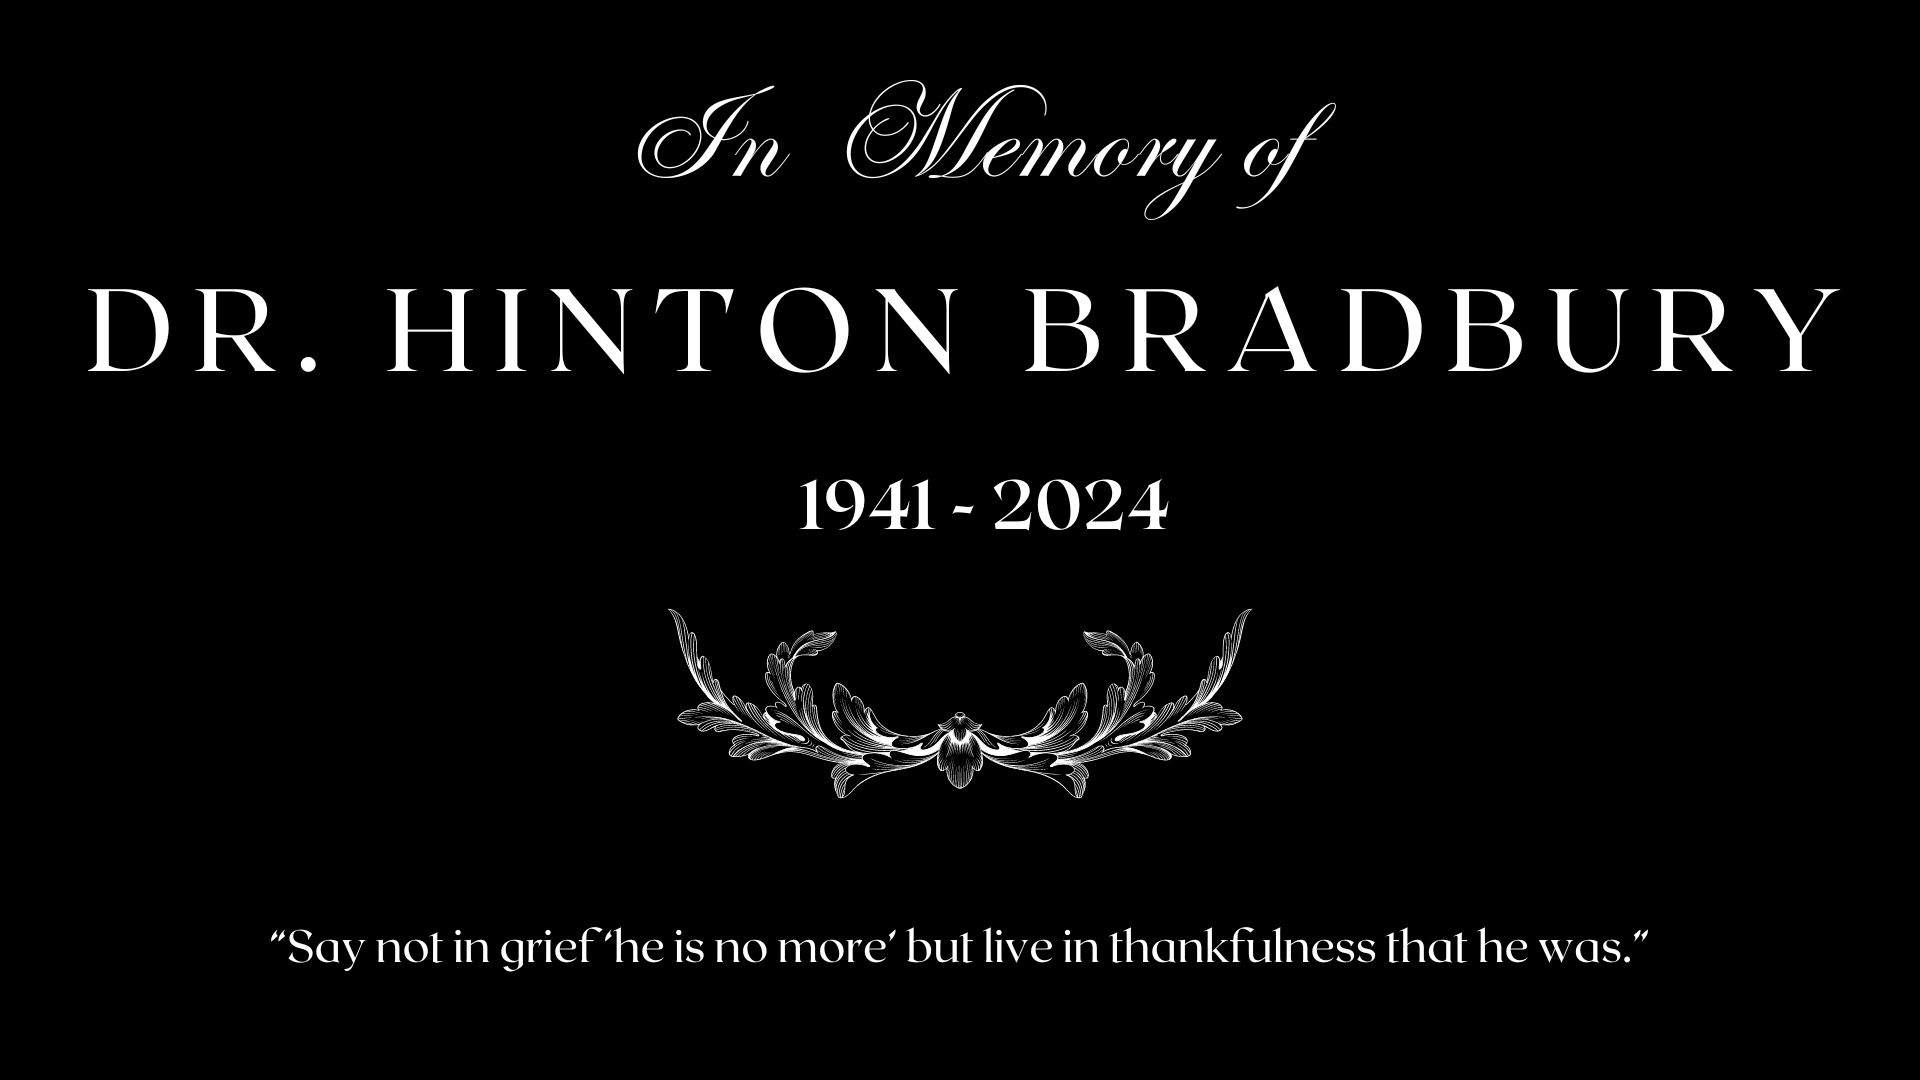 In Memory of Hinton Bradbury 1941 - 2024- Say not in grief 'he is no more' but in thankfulness that he was.